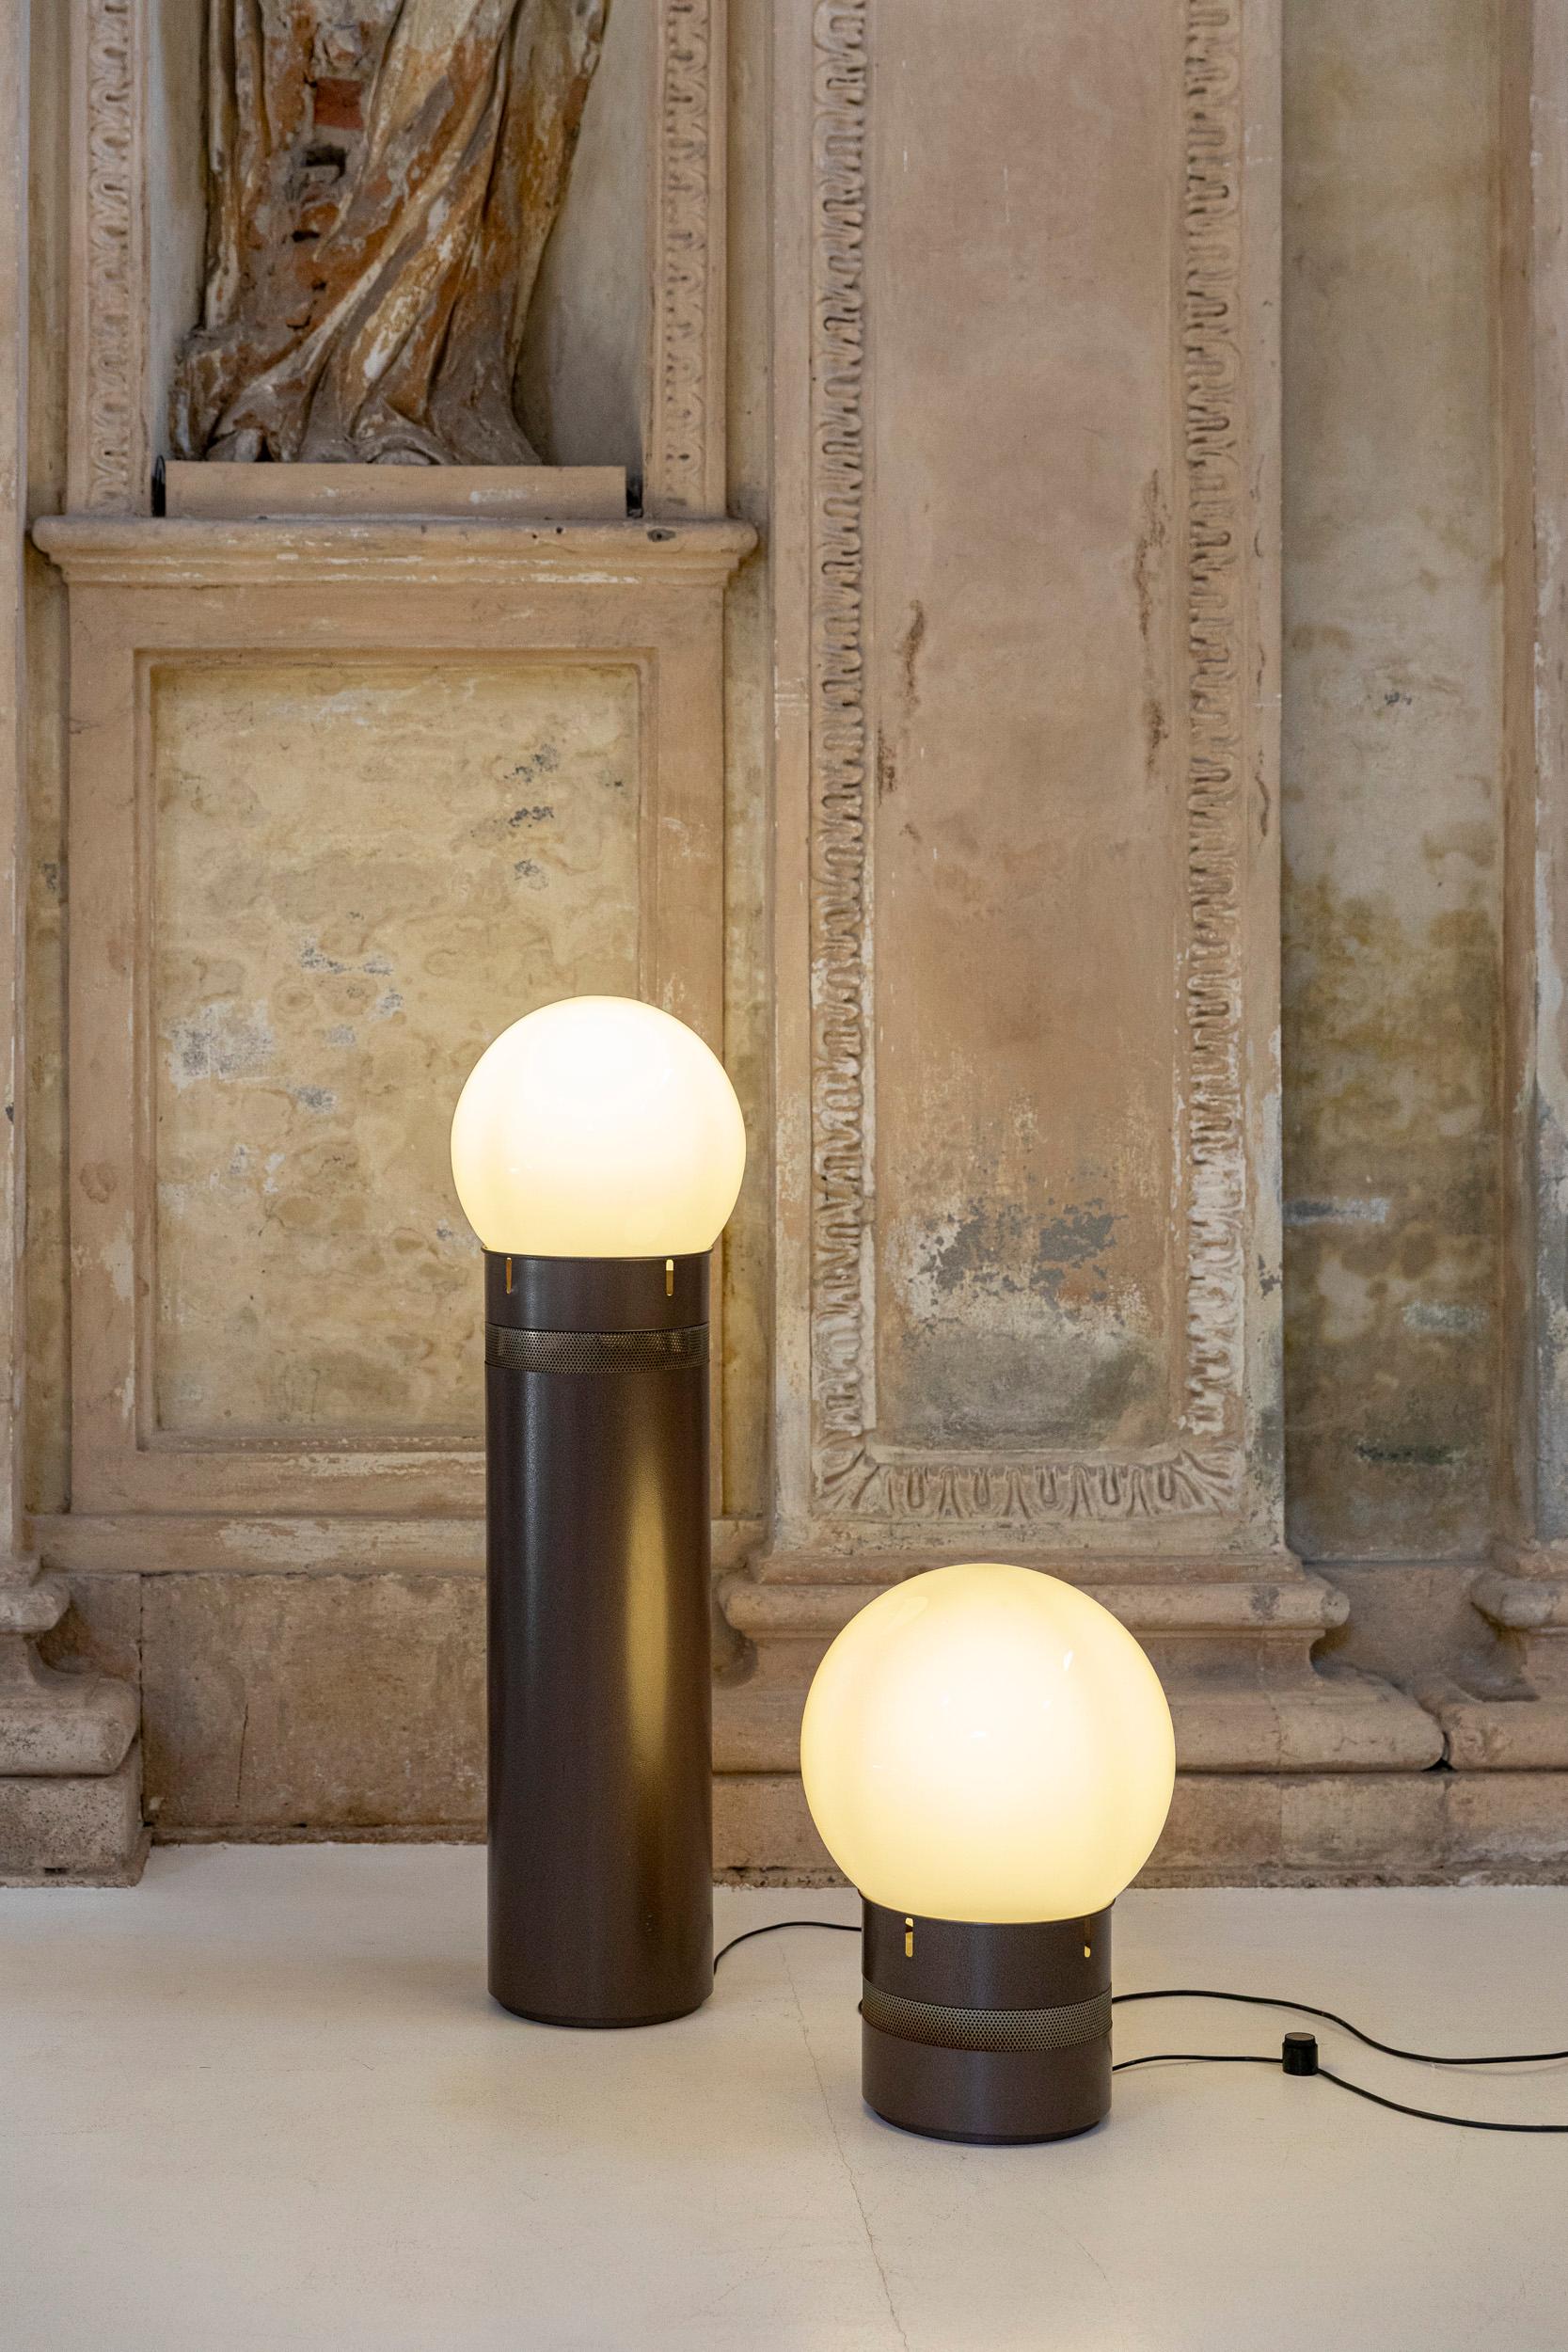 Mid-20th Century Oracolo Floor Lamp by Gae Aulenti for Artemide